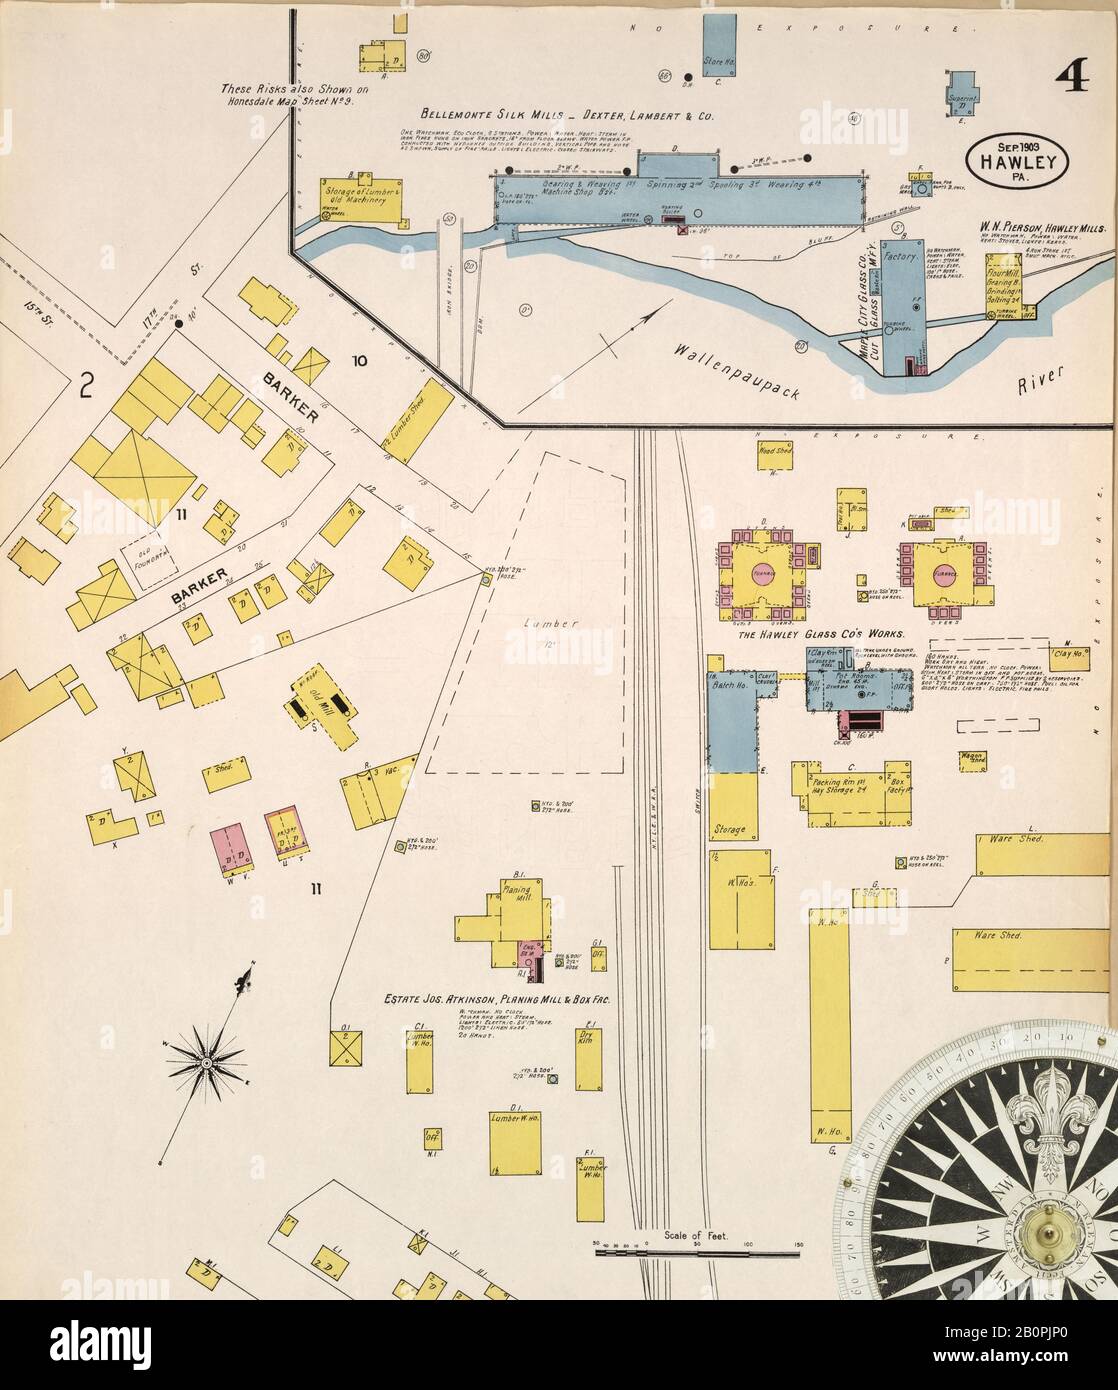 Image 7 of Sanborn Fire Insurance Map from Mexico City, Federal District, Distrito Federal. 1905. 25 Sheet(s). Includes 9 skeleton maps, America, street map with a Nineteenth Century compass Stock Photo